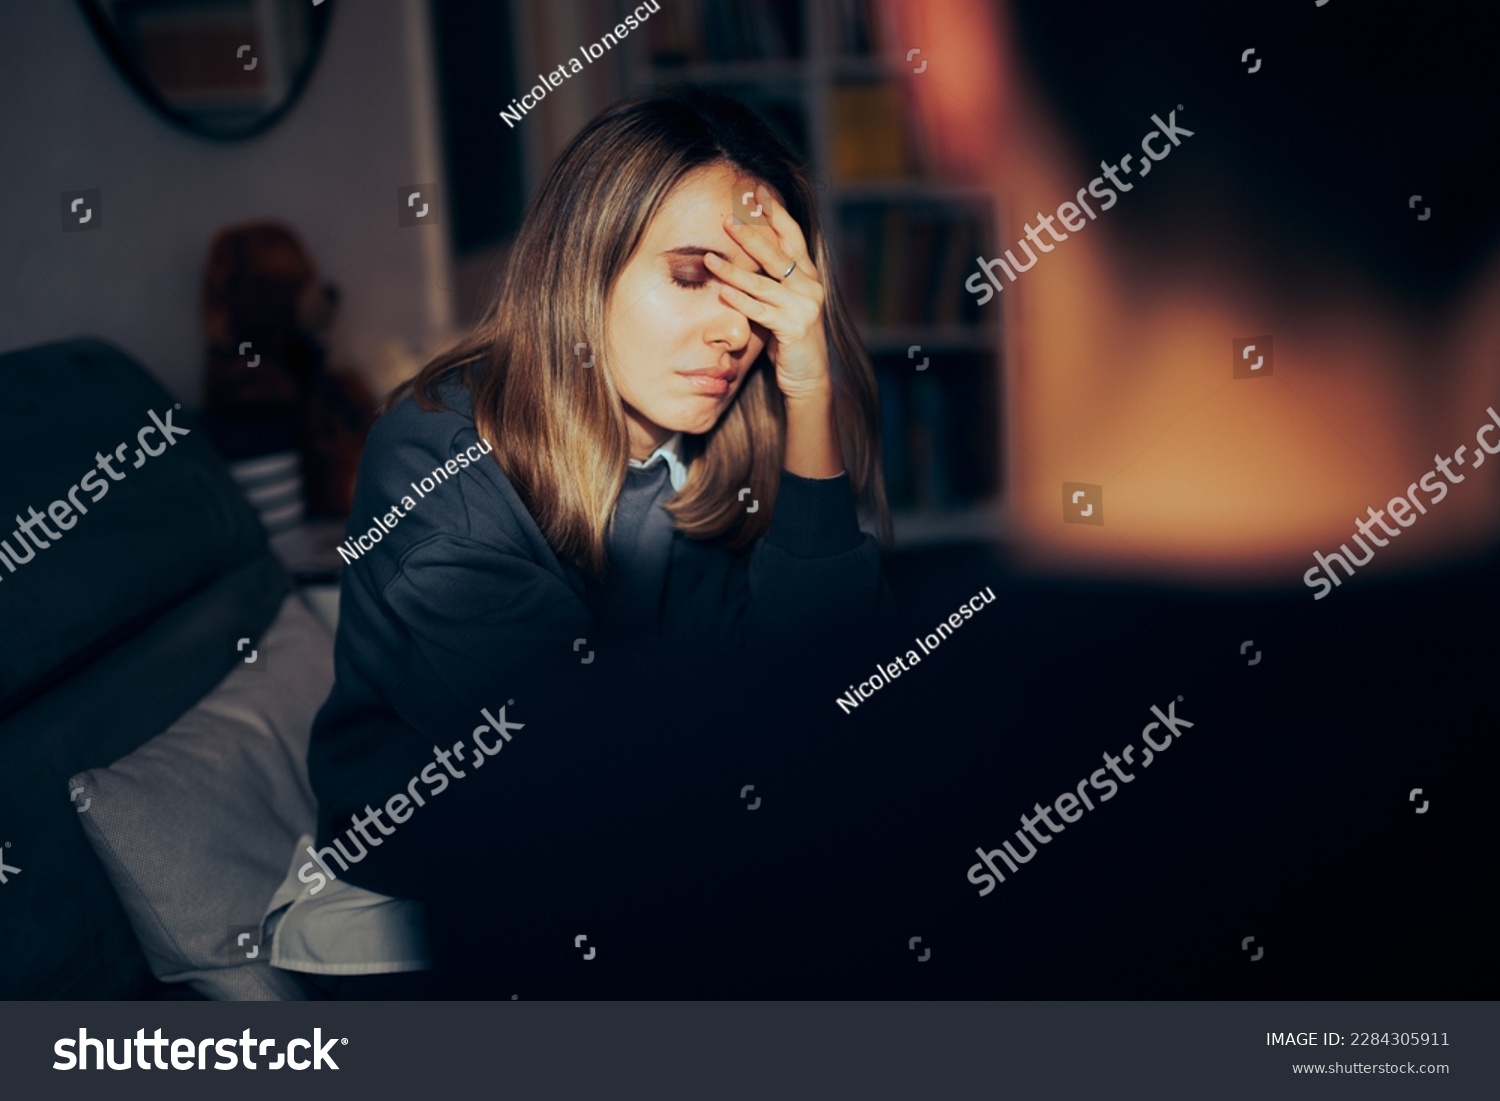 
Sad Unhappy Woman Breaking up with Her Partner After Discussing. Depressed girlfriend fighting with her boyfriend at home deciding to split up
 #2284305911